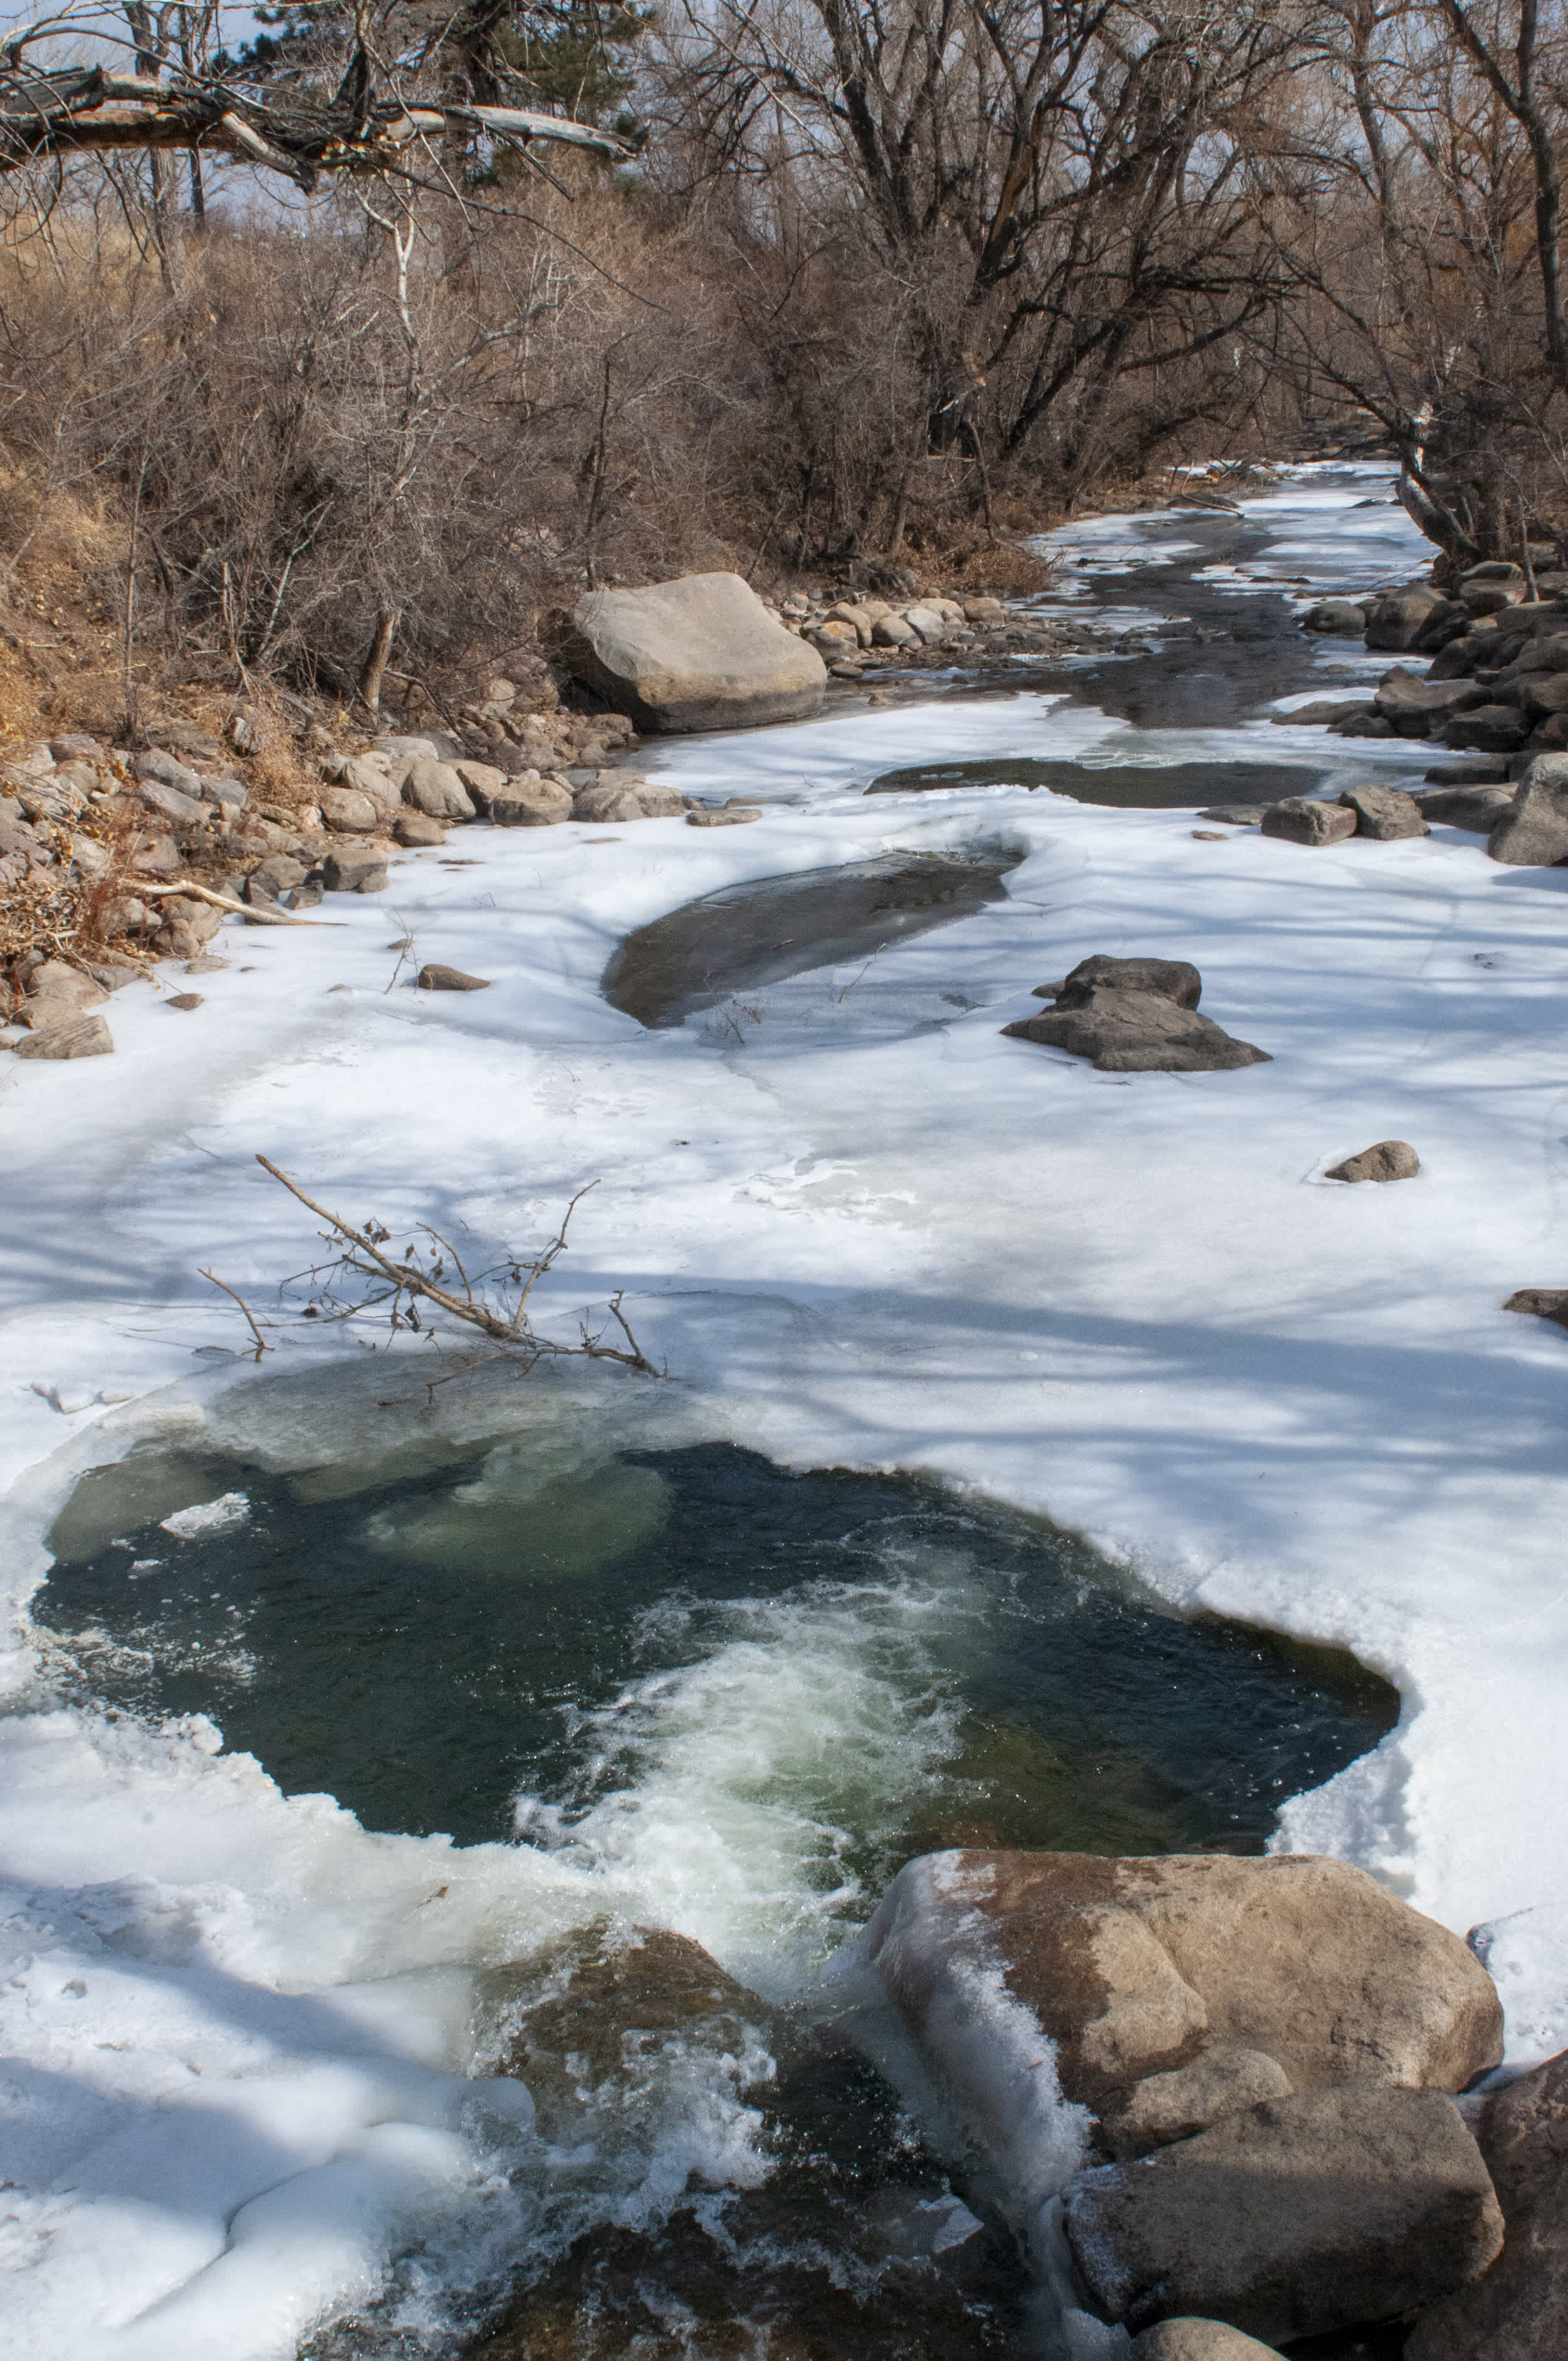 Boulder Creek mostly frozen and covered in snow. #Boulder #Colorado #Winter #Nature